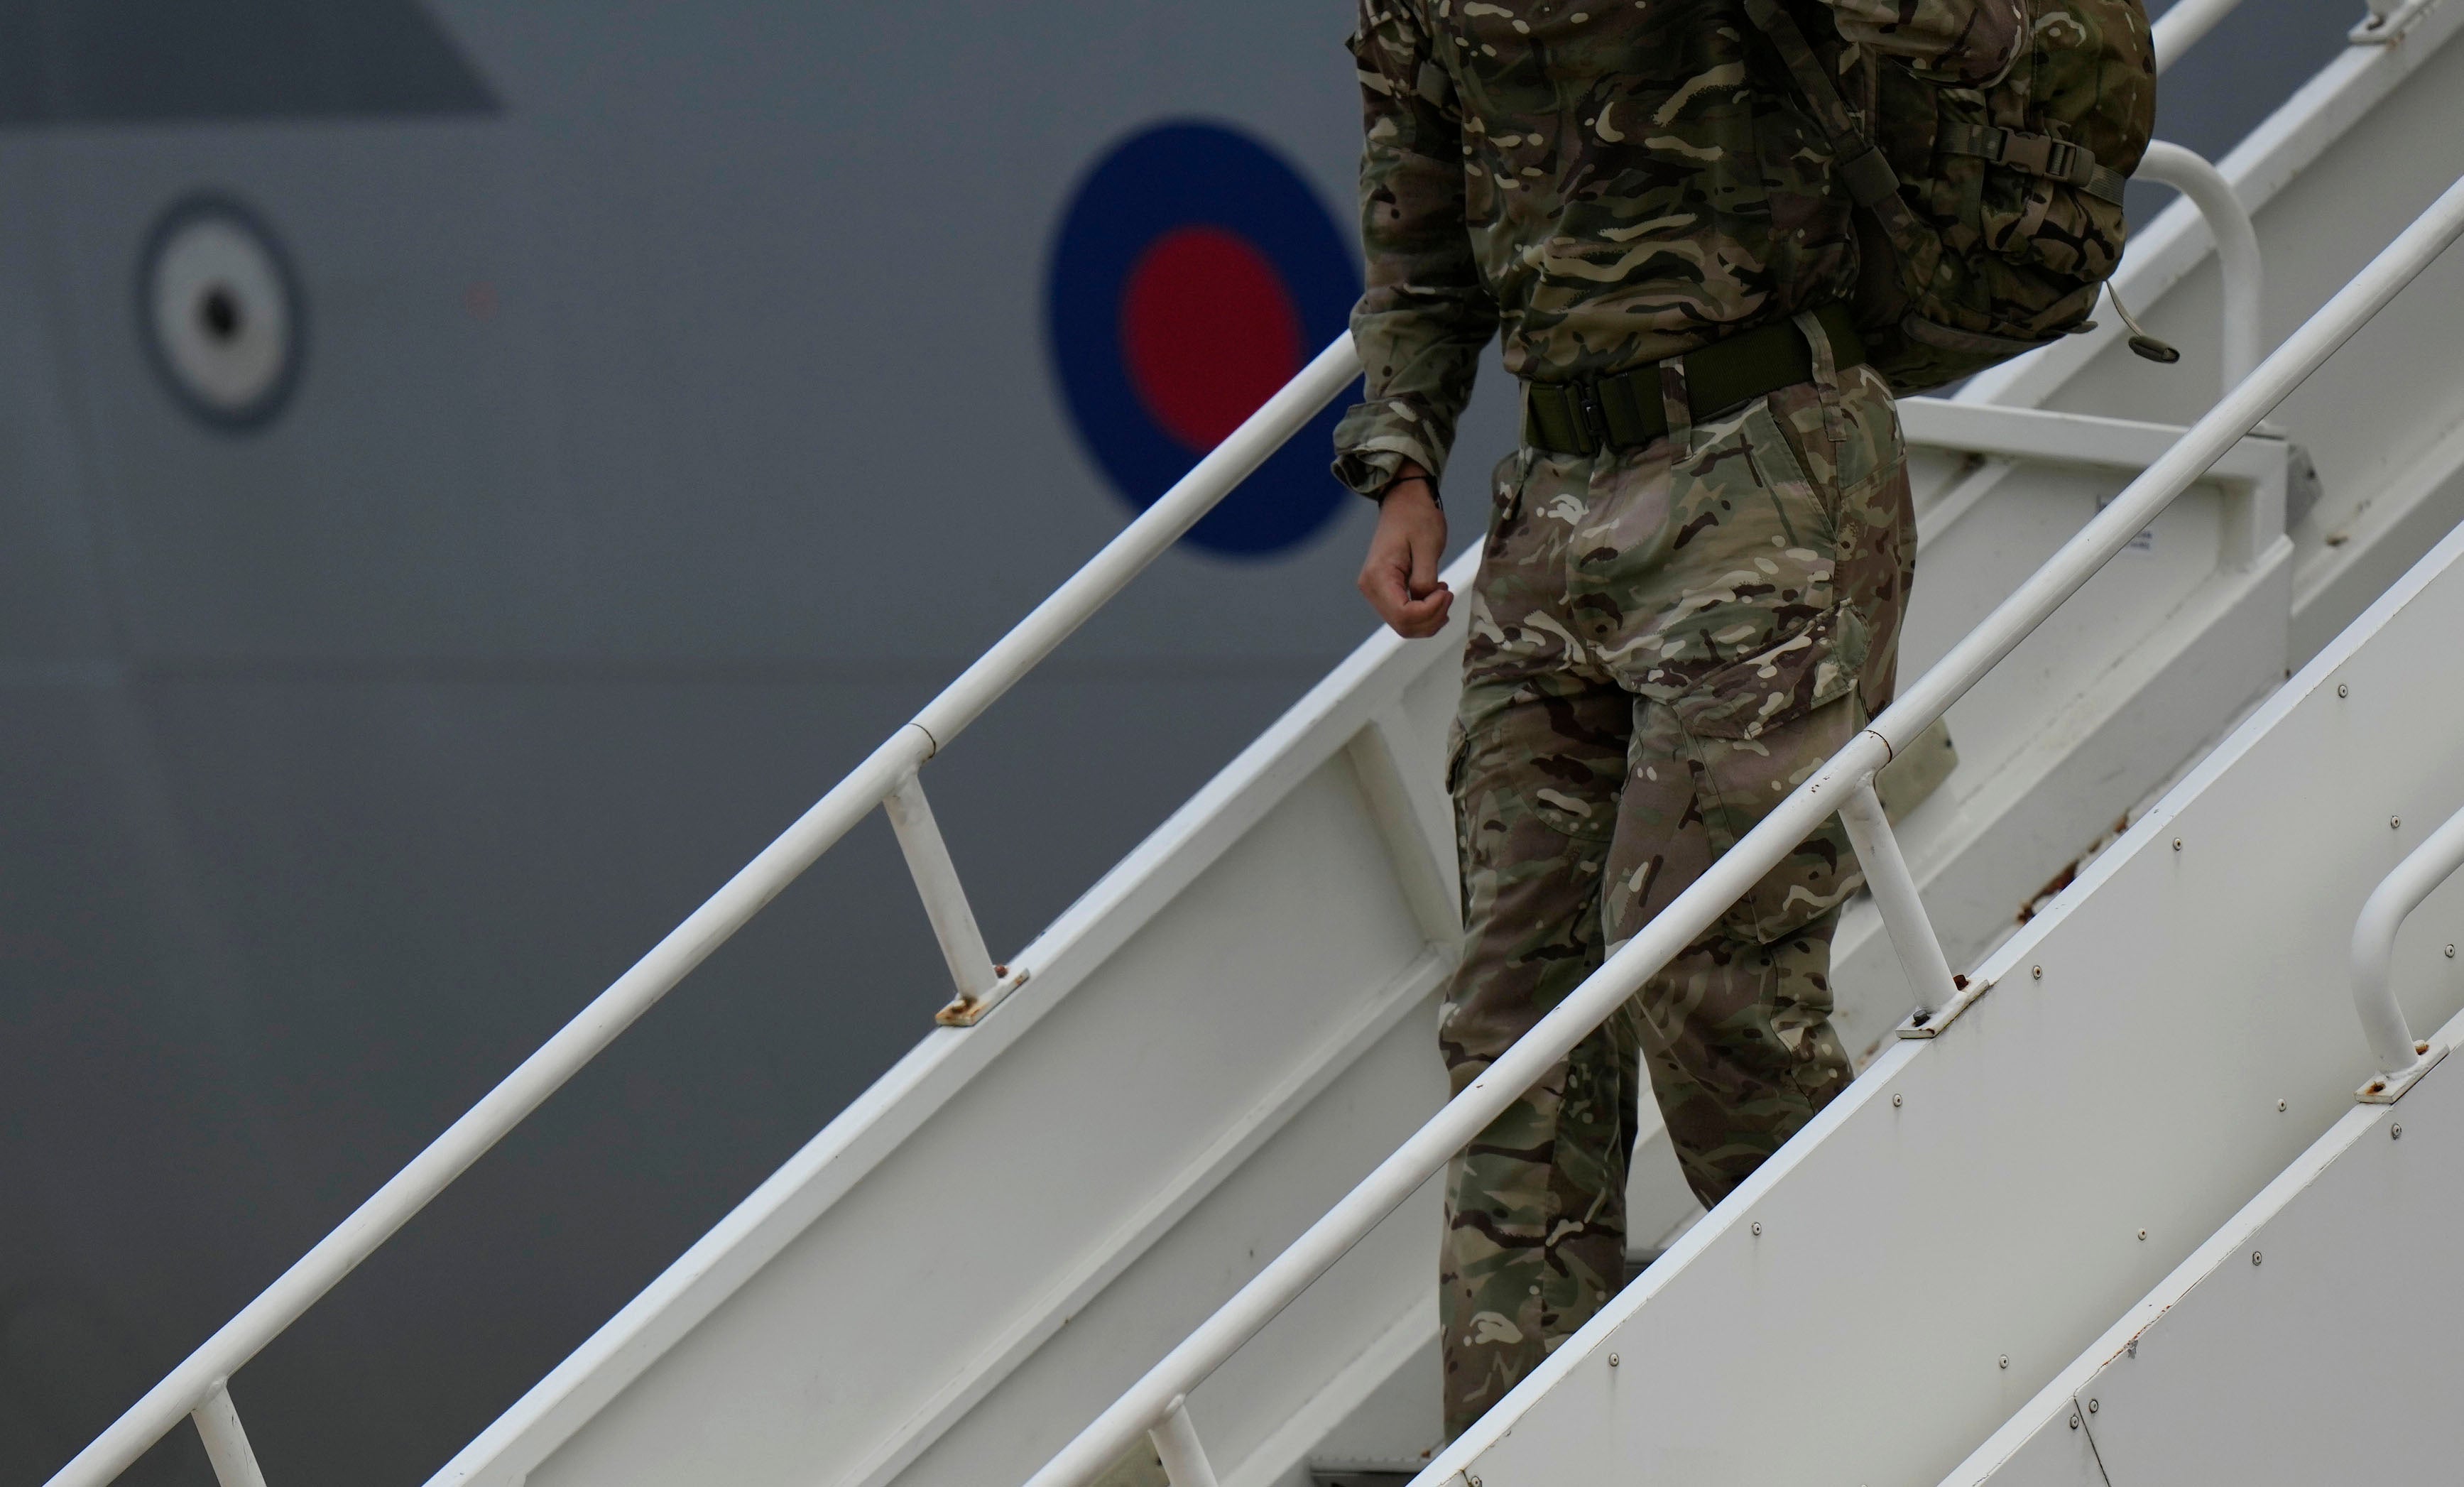 A member of the British armed forces disembarks an RAF Voyager aircraft at Brize Norton as they return from helping in operations to evacuate people from Kabul airport